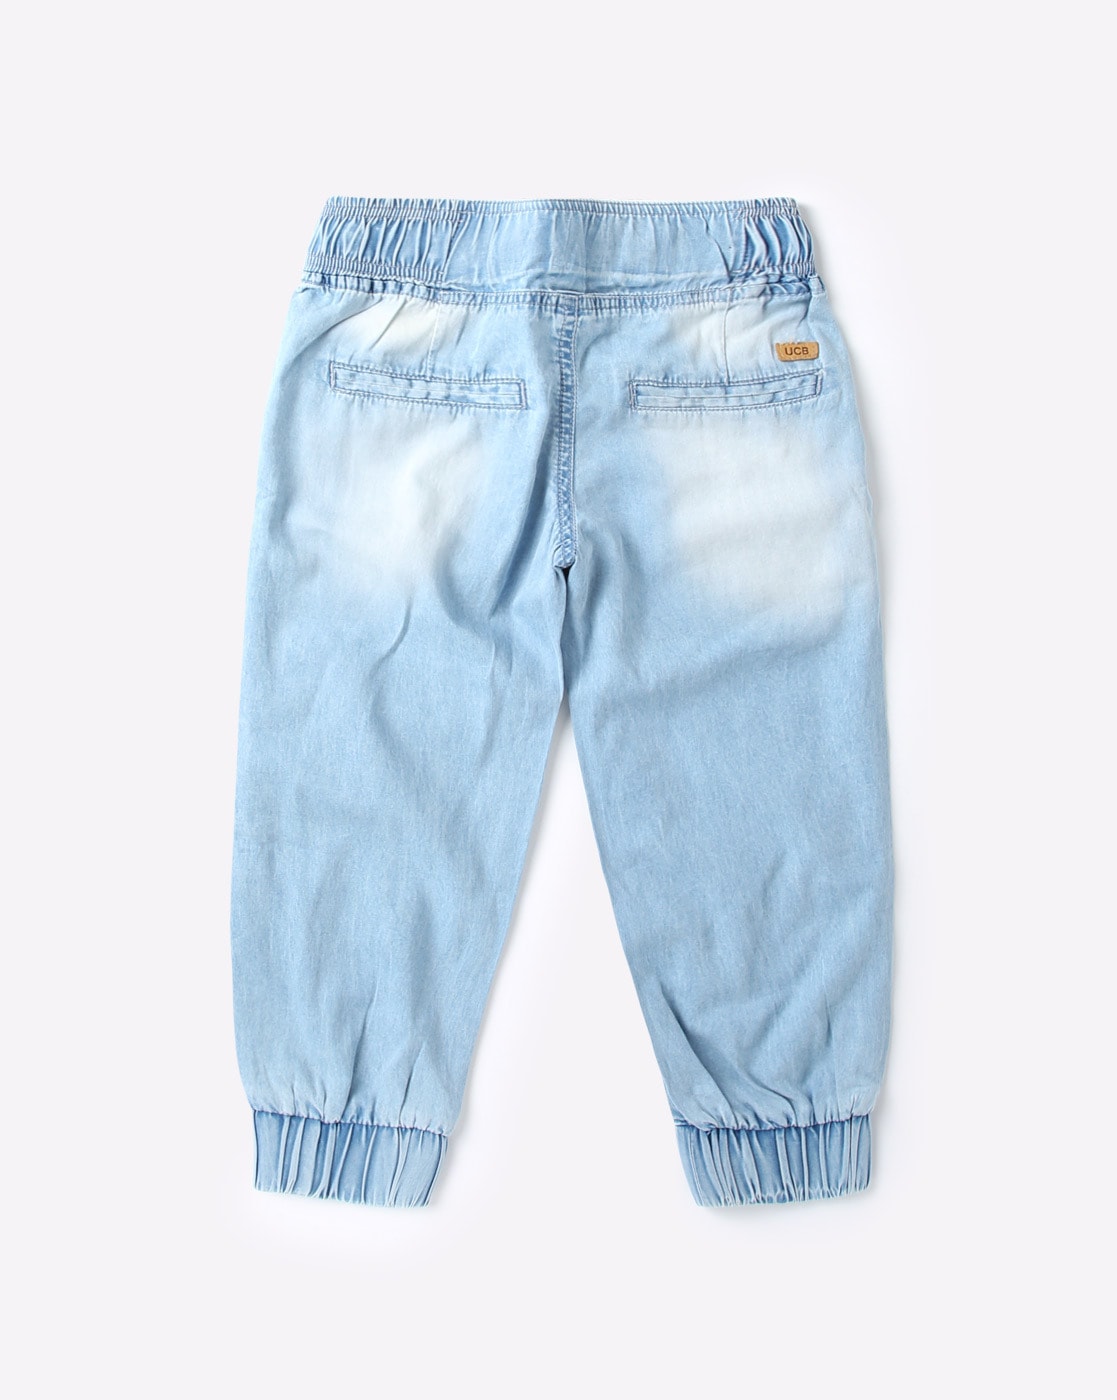 ucb joggers jeans